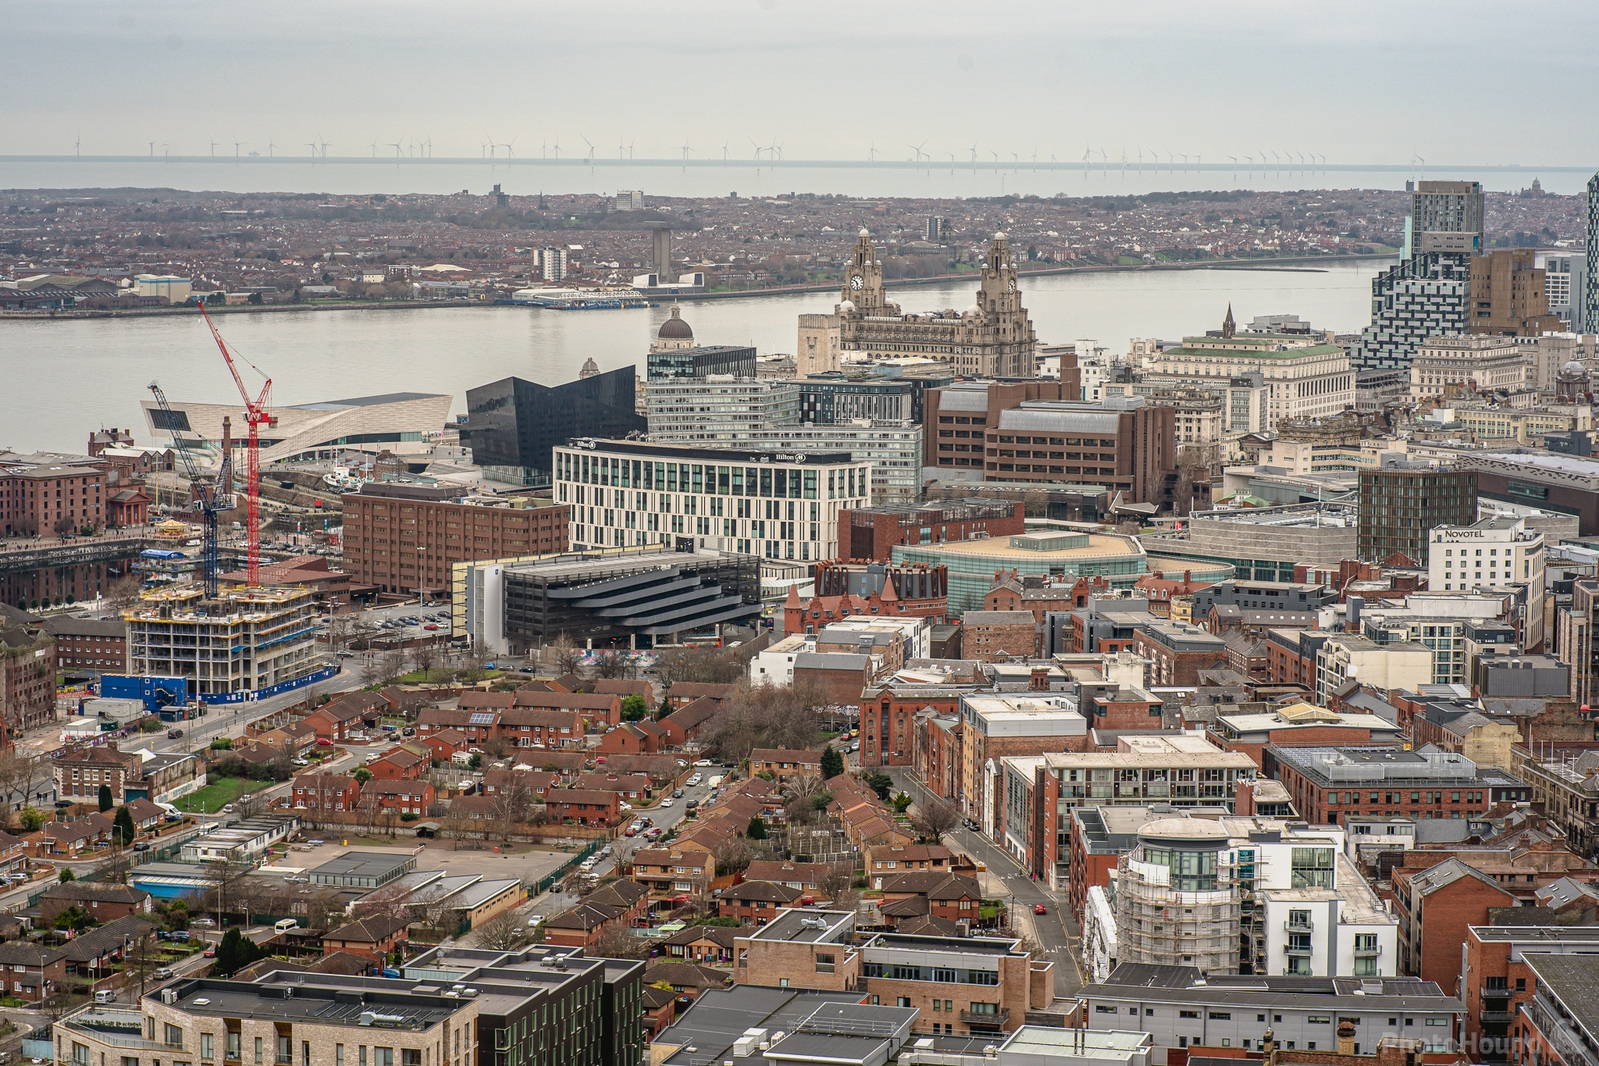 Image of Liverpool Cathedral by James Billings.